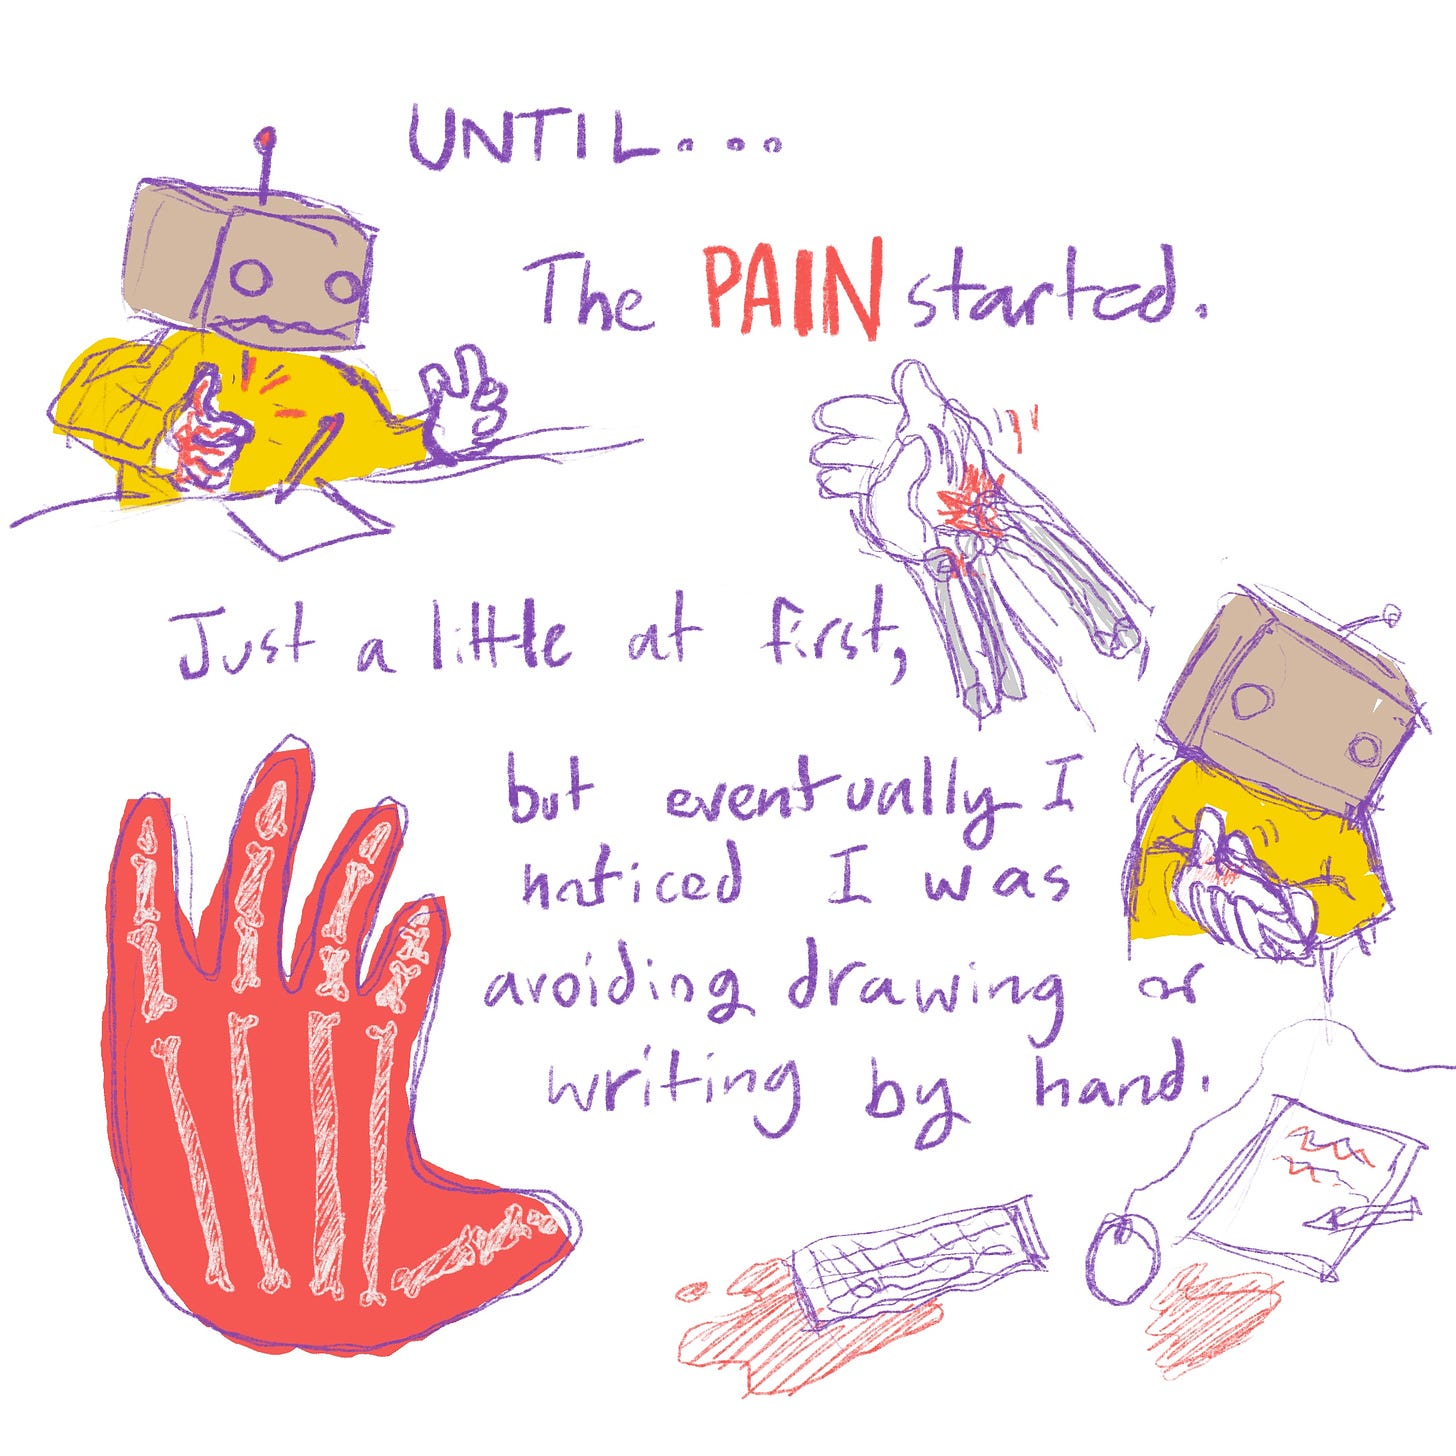 Until... the pain started. Just a little at first, but eventually I noticed I was avoiding drawing or writing by hand.